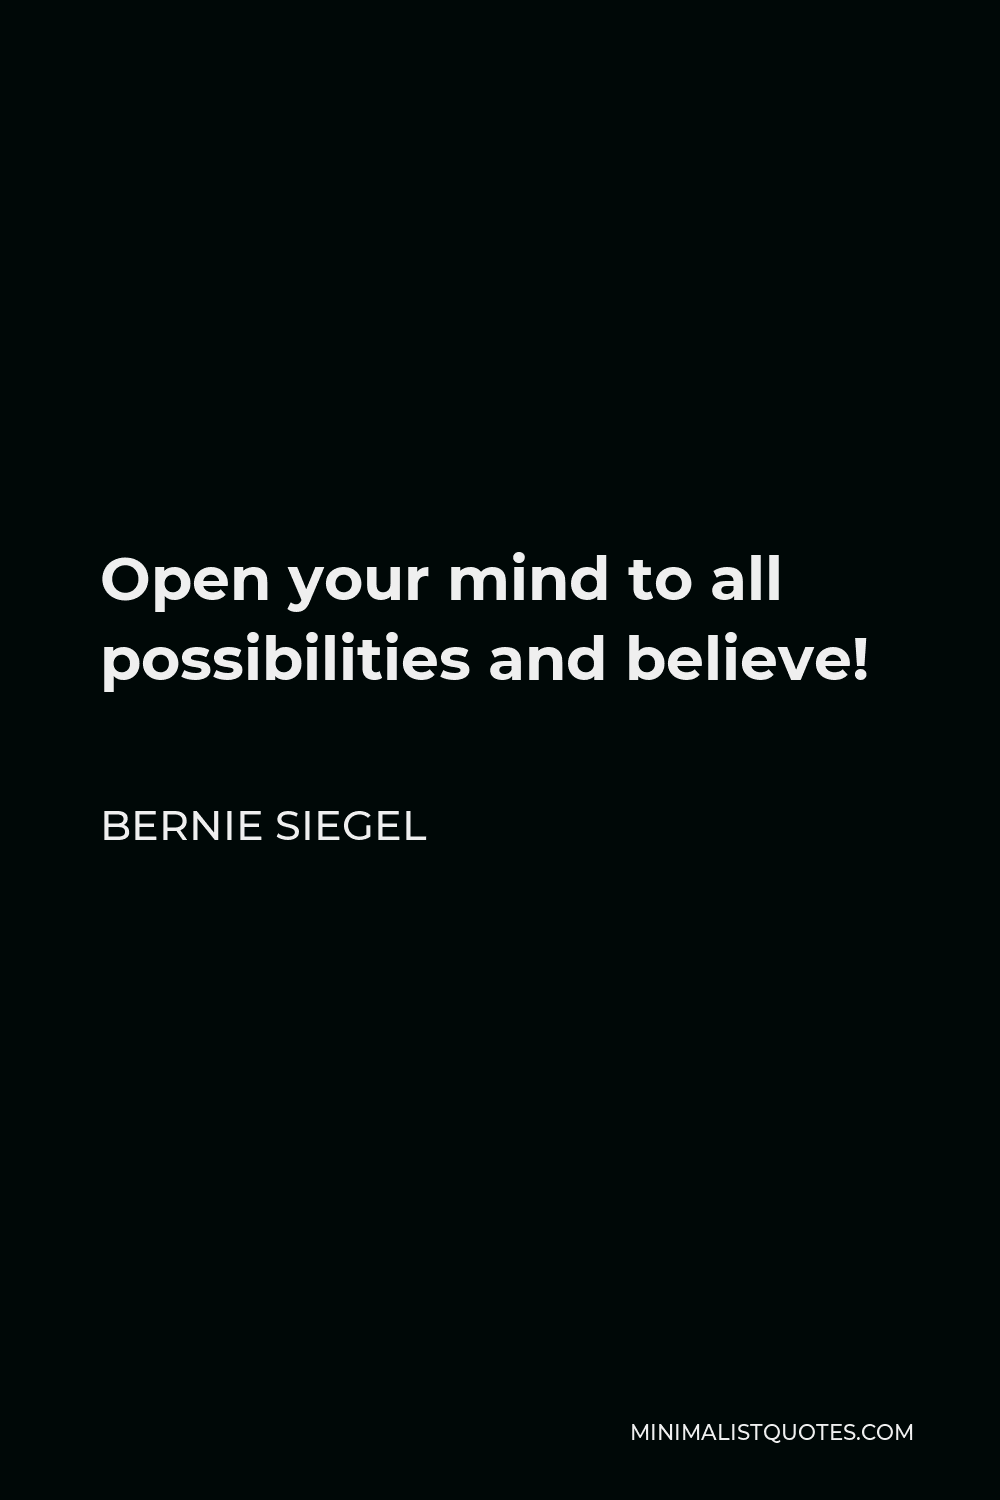 Bernie Siegel Quote - Open your mind to all possibilities and believe!